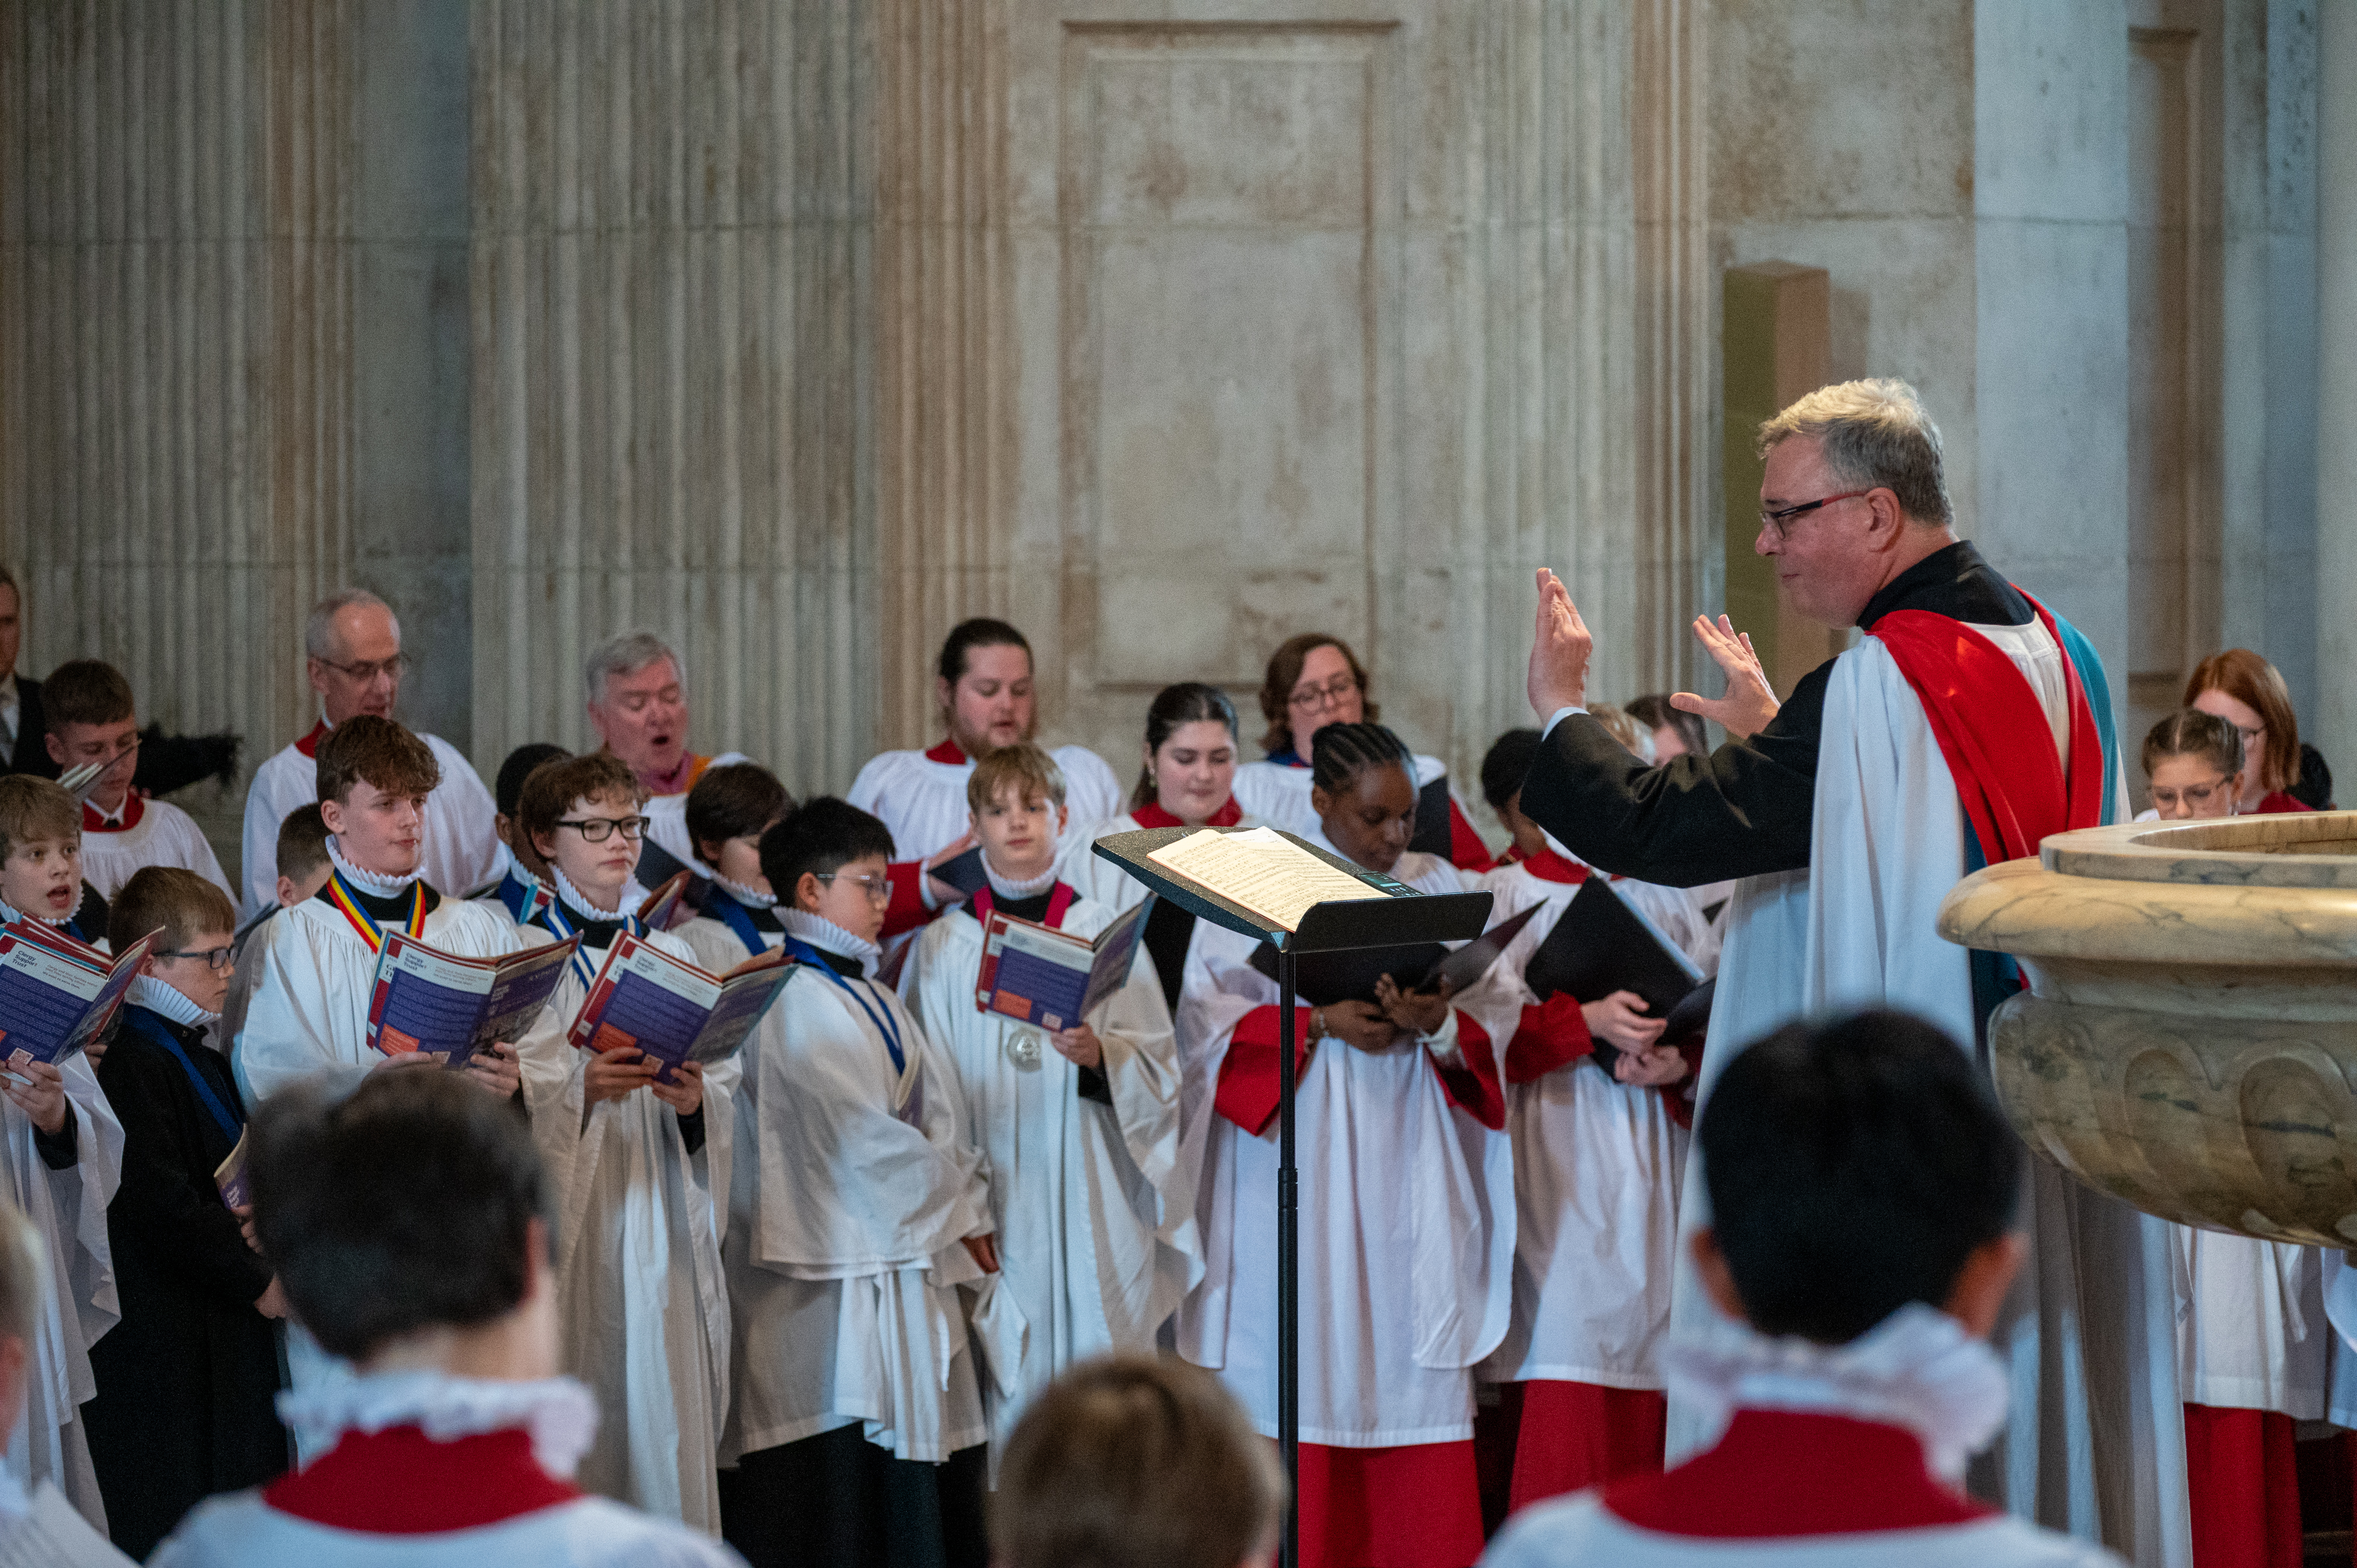 Andrew Carwood, Director of Music at St Paul's Cathedral, leading the three combined choirs in song.